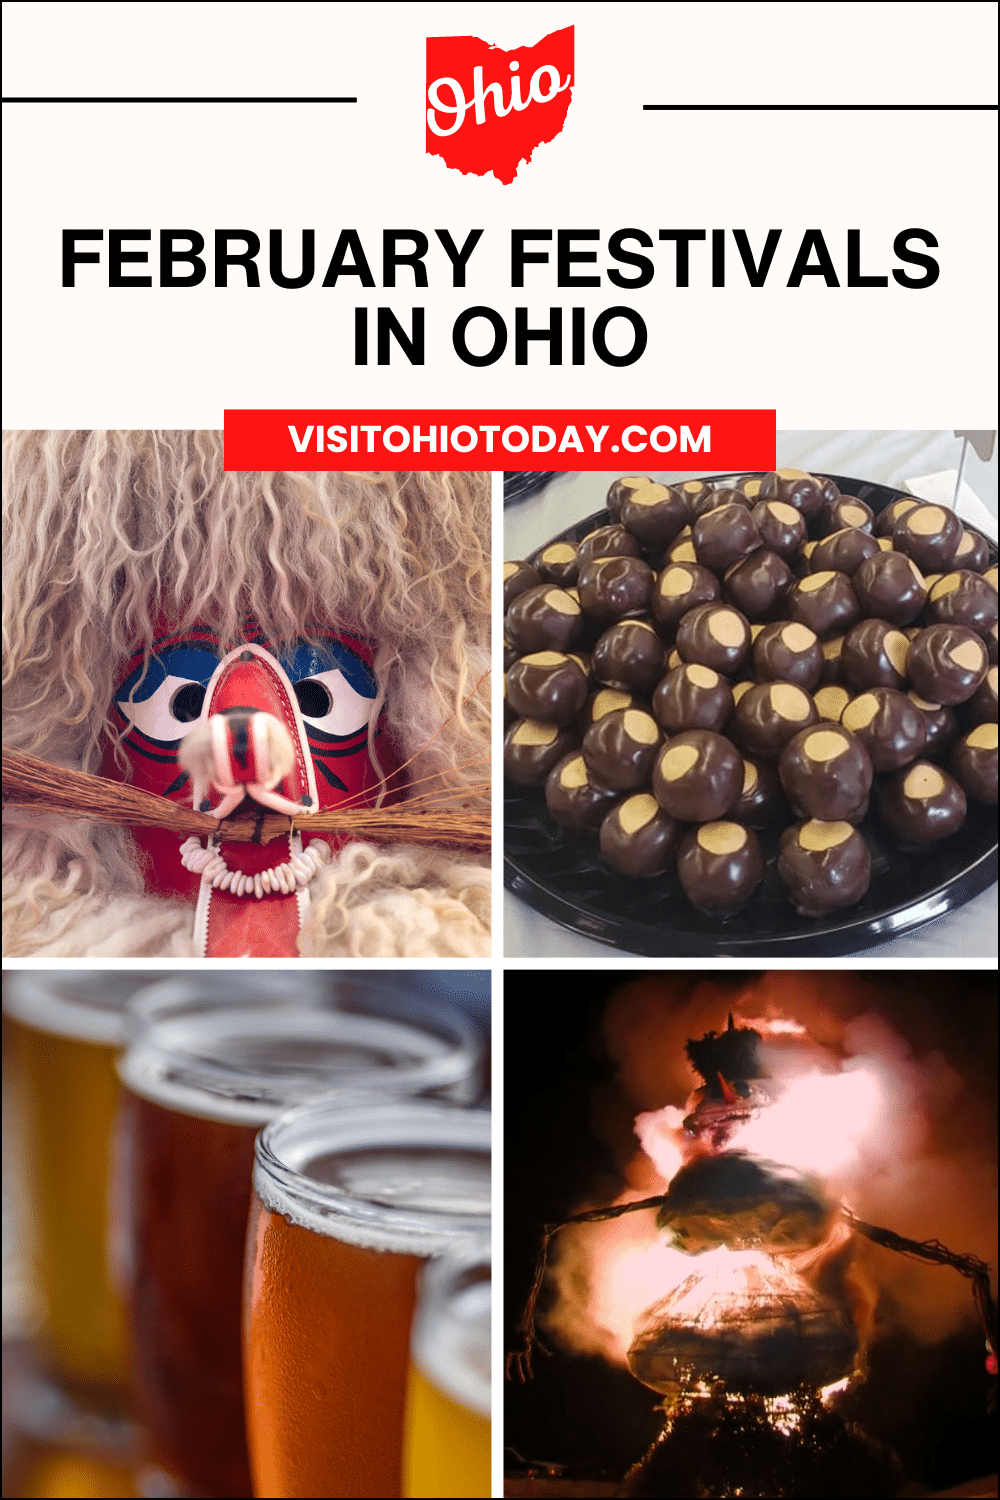 February is a time to celebrate lovers and the end of winter. This list of February Festivals in Ohio may help you find ways to enjoy this frigid time of year.